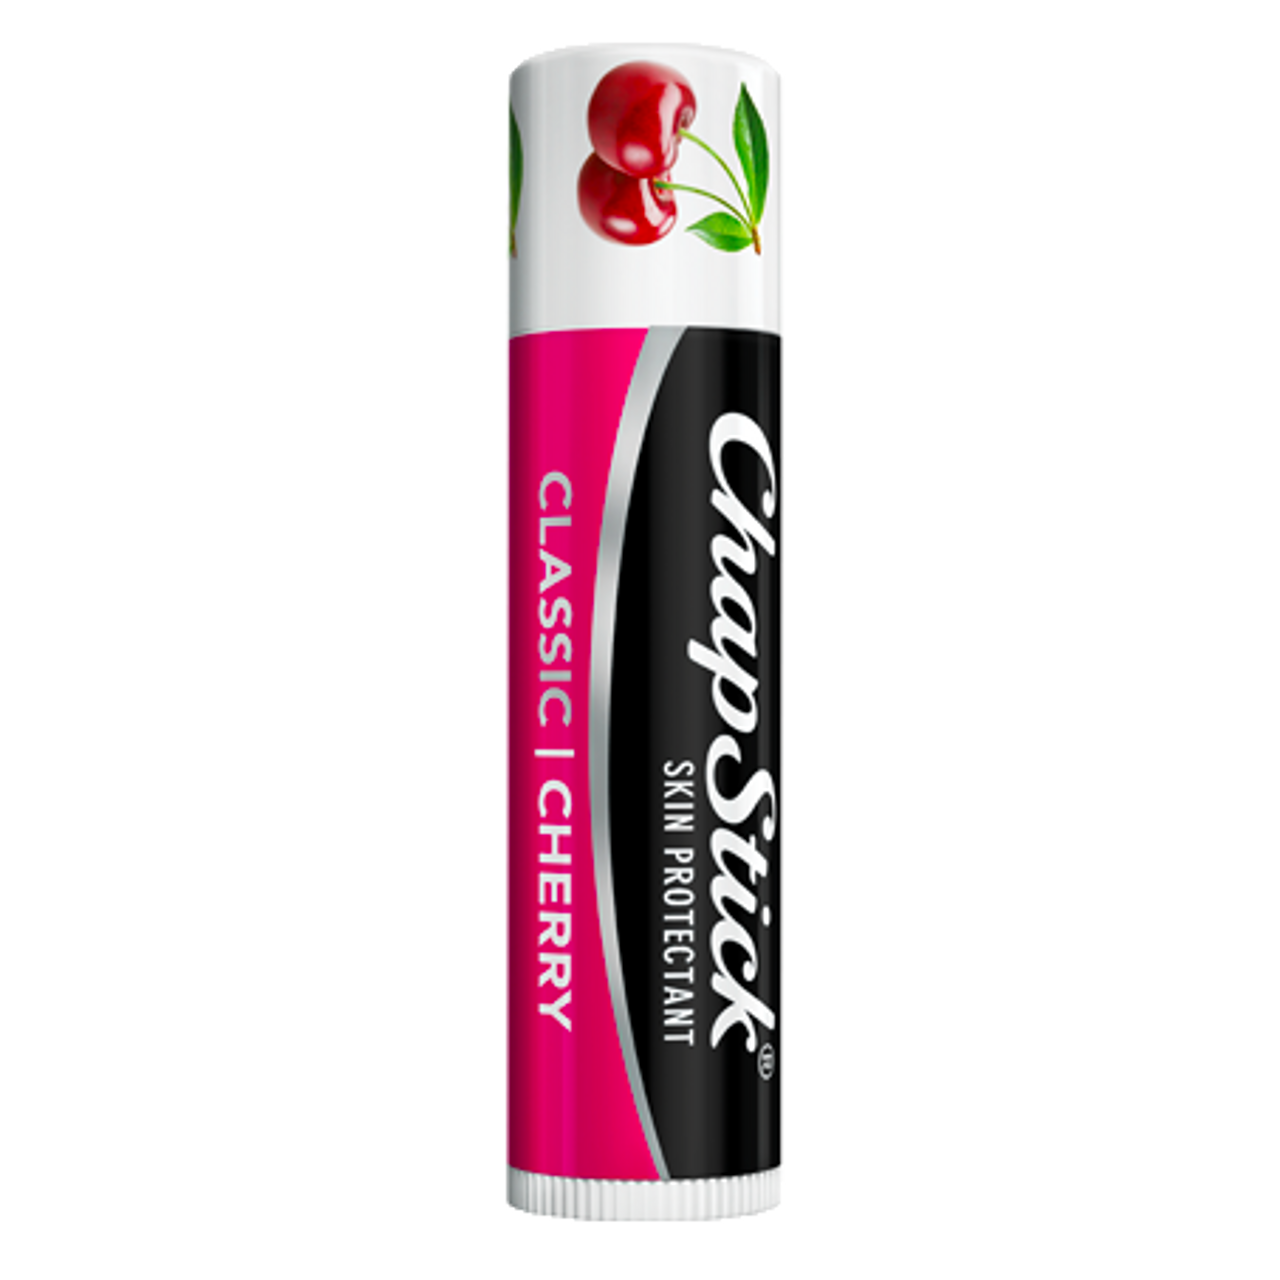 ChapStick® Classic Cherry Flavor Skin Protectant Lip Balm (0.15 ounce, box of 12)